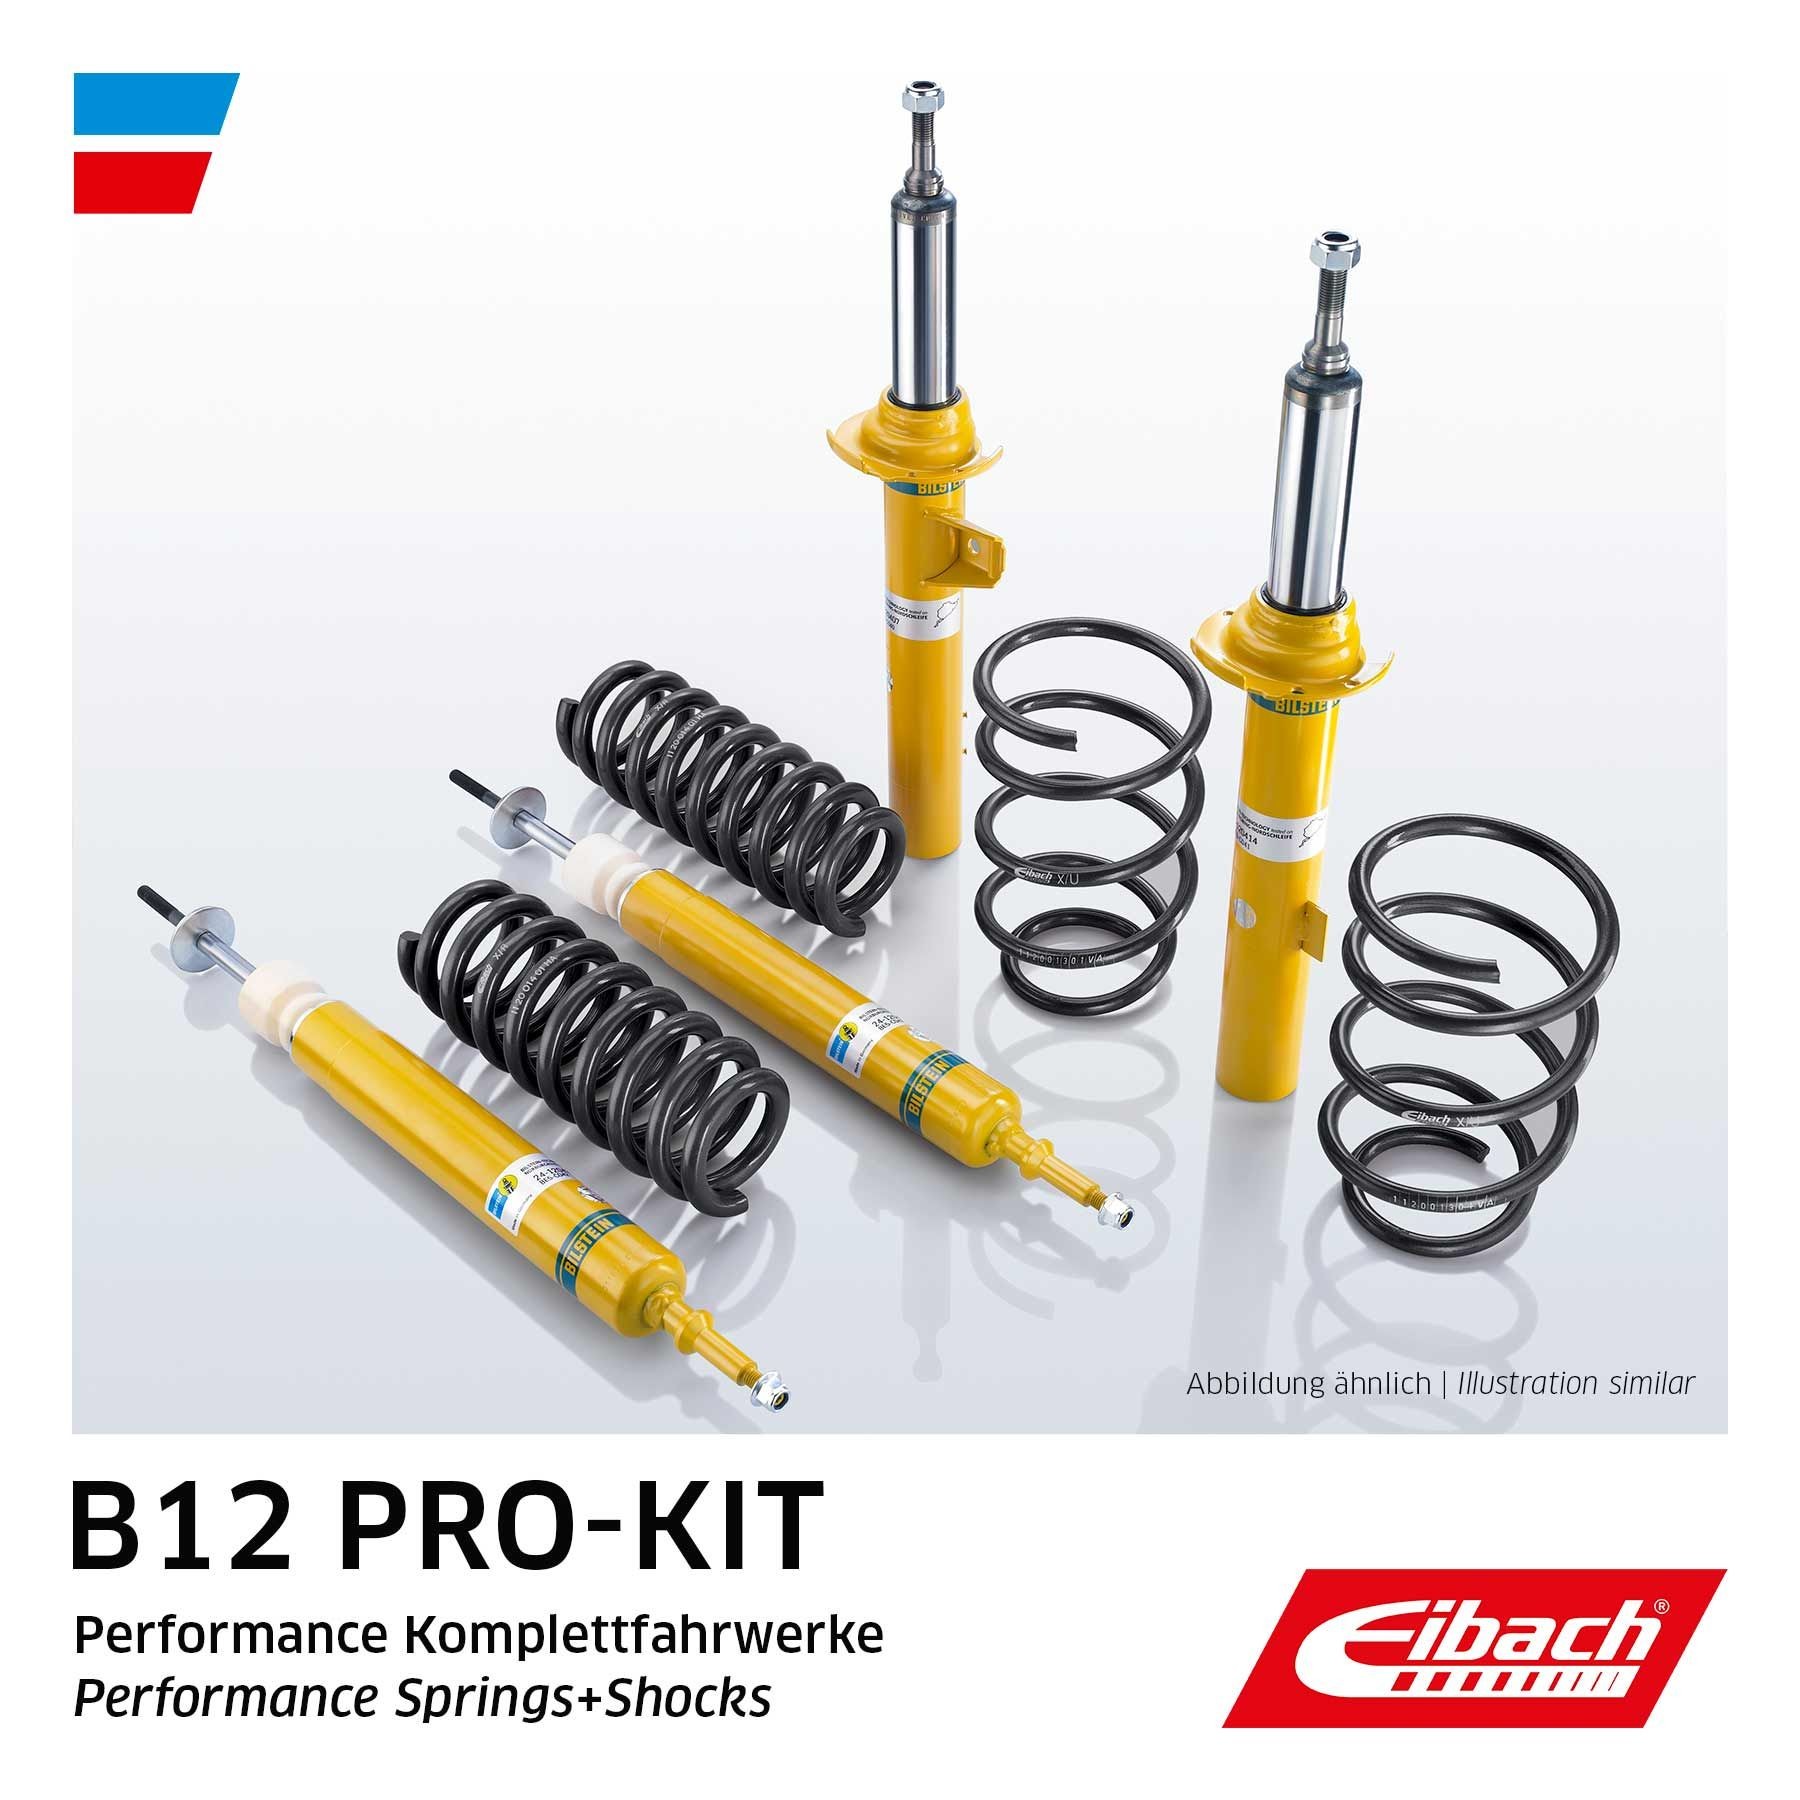 EIBACH Suspension kit, coil springs / shock absorbers VW Golf 6 Convertible new E90-85-022-07-22